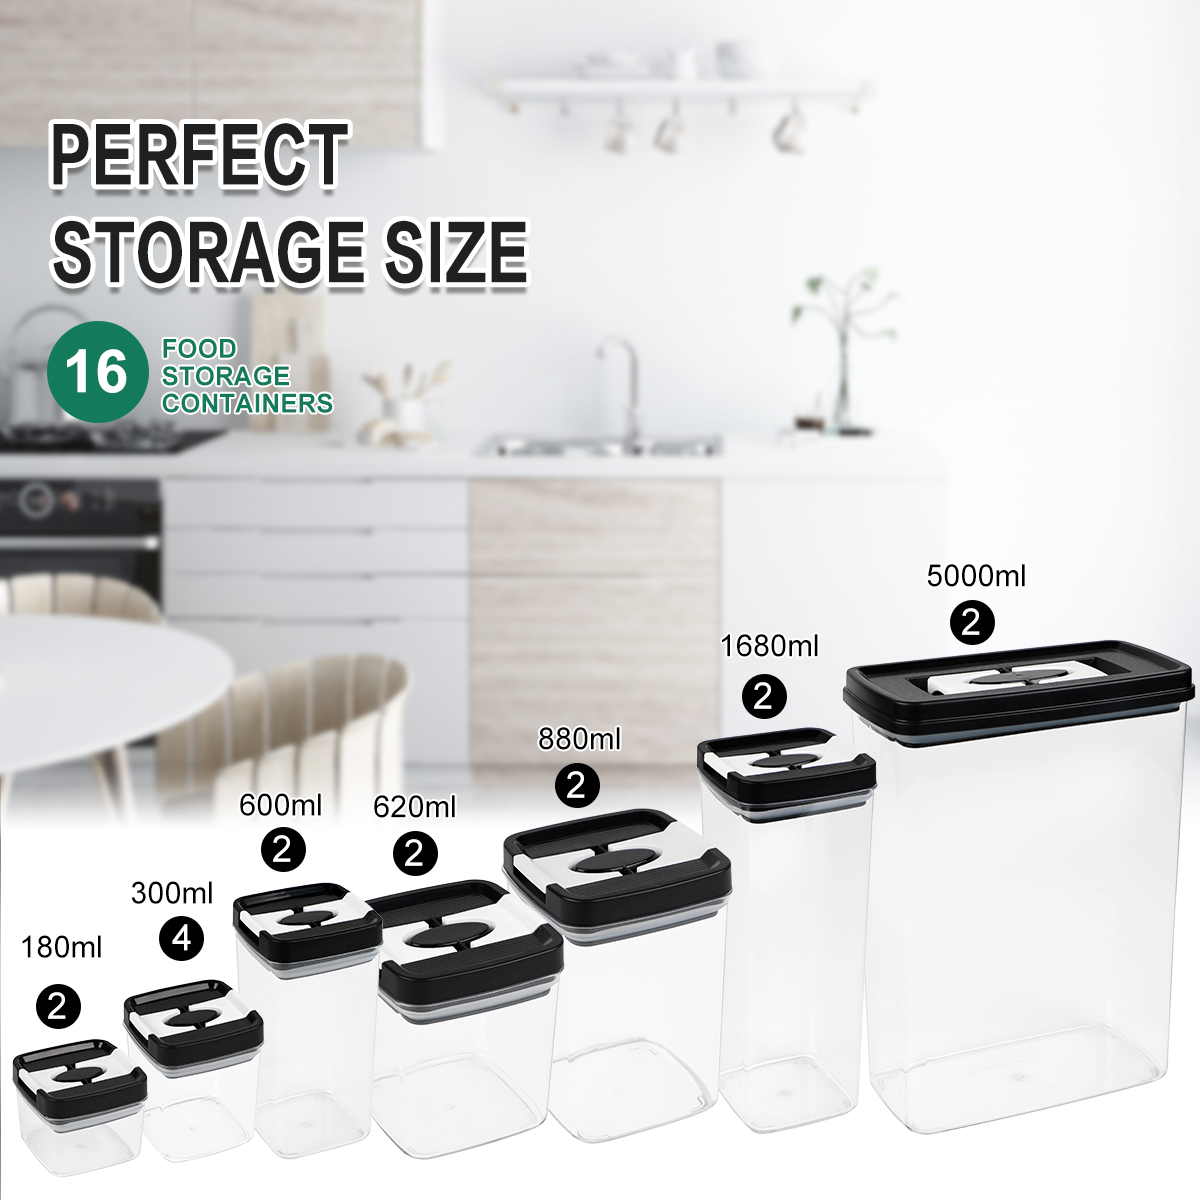 6 Pieces PET Airtight Food Storage Containers Set with Locking Lids Food Storage Containers Set Stackable